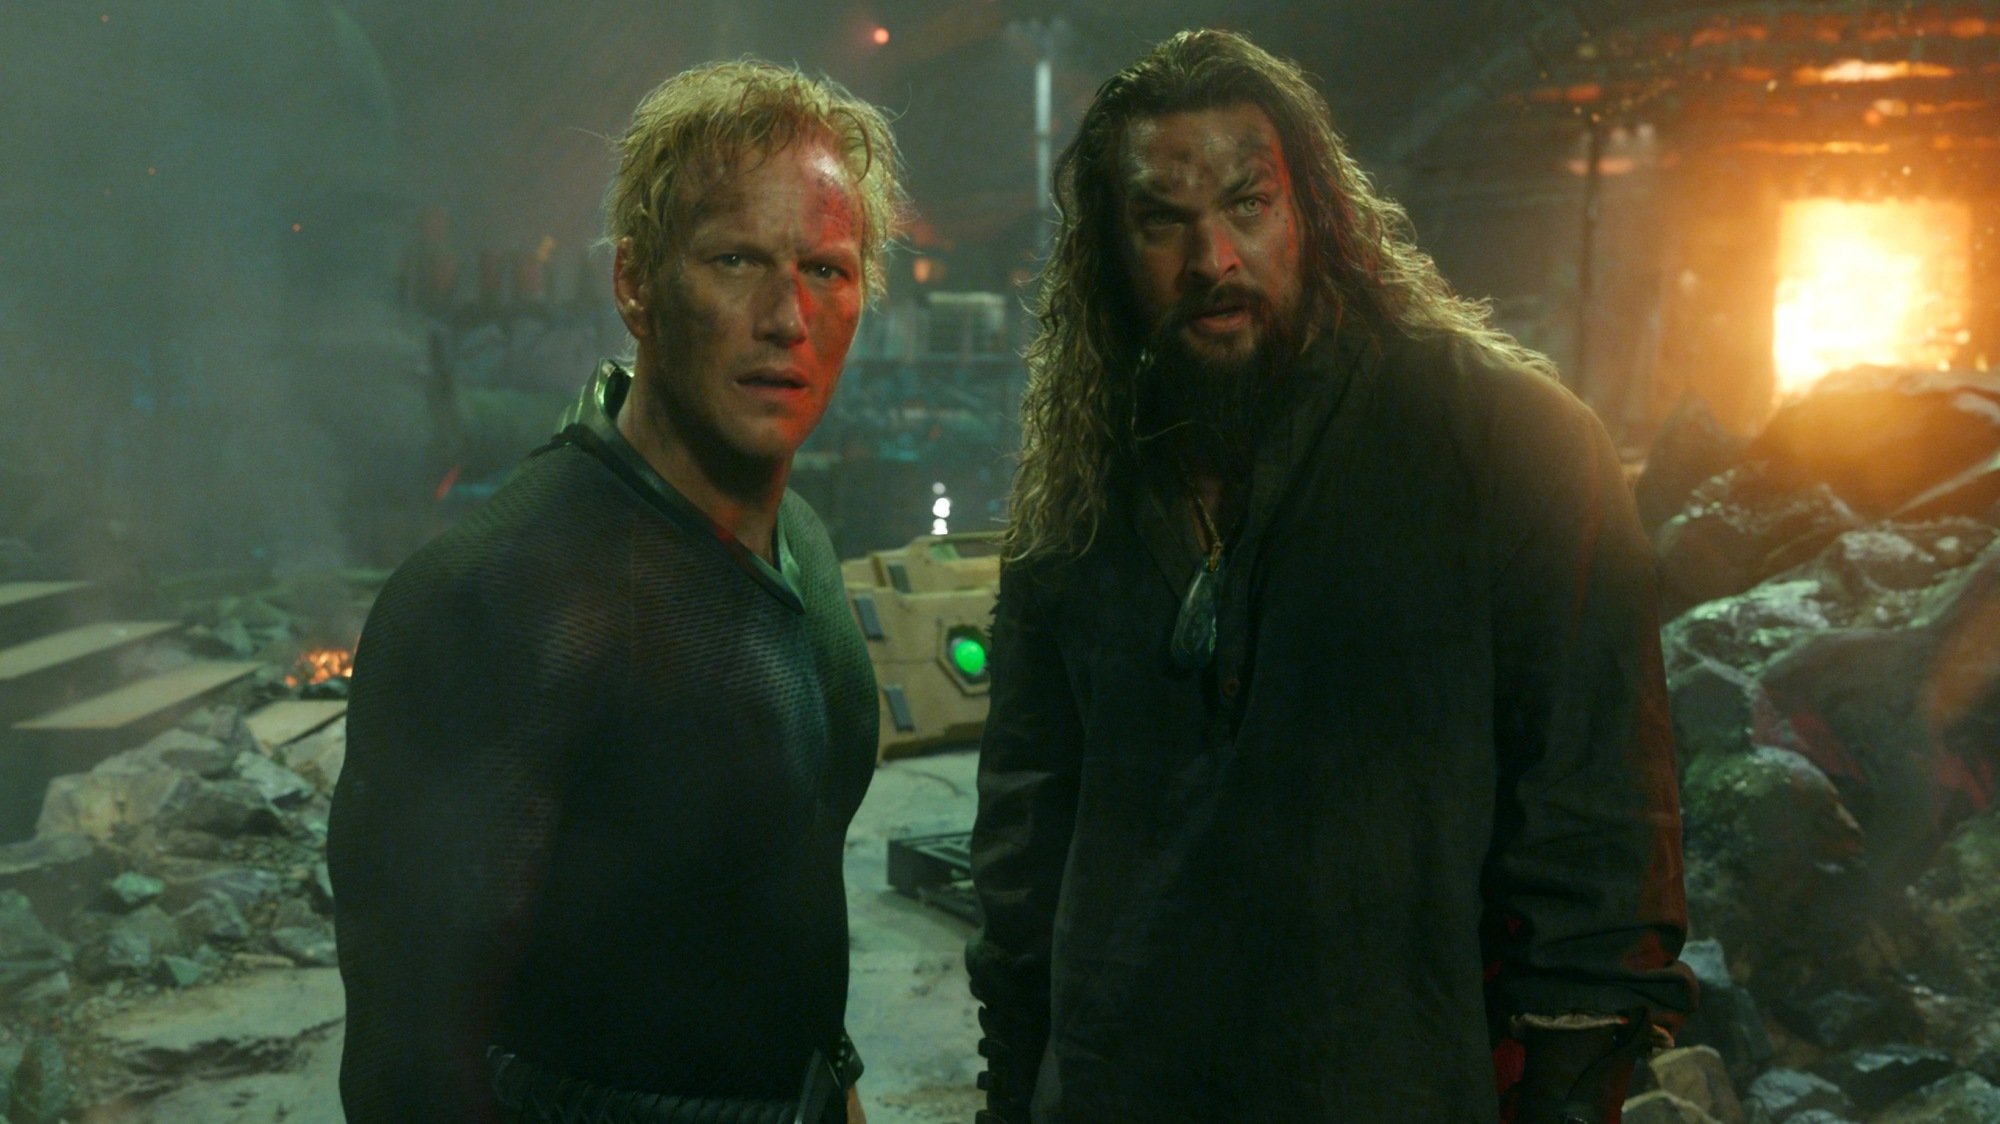 PATRICK WILSON as Orm and JASON MOMOA as Aquaman in Warner Bros. Pictures’ action adventure “Aquaman and the Lost Kingdom,” a Warner Bros. Pictures release.